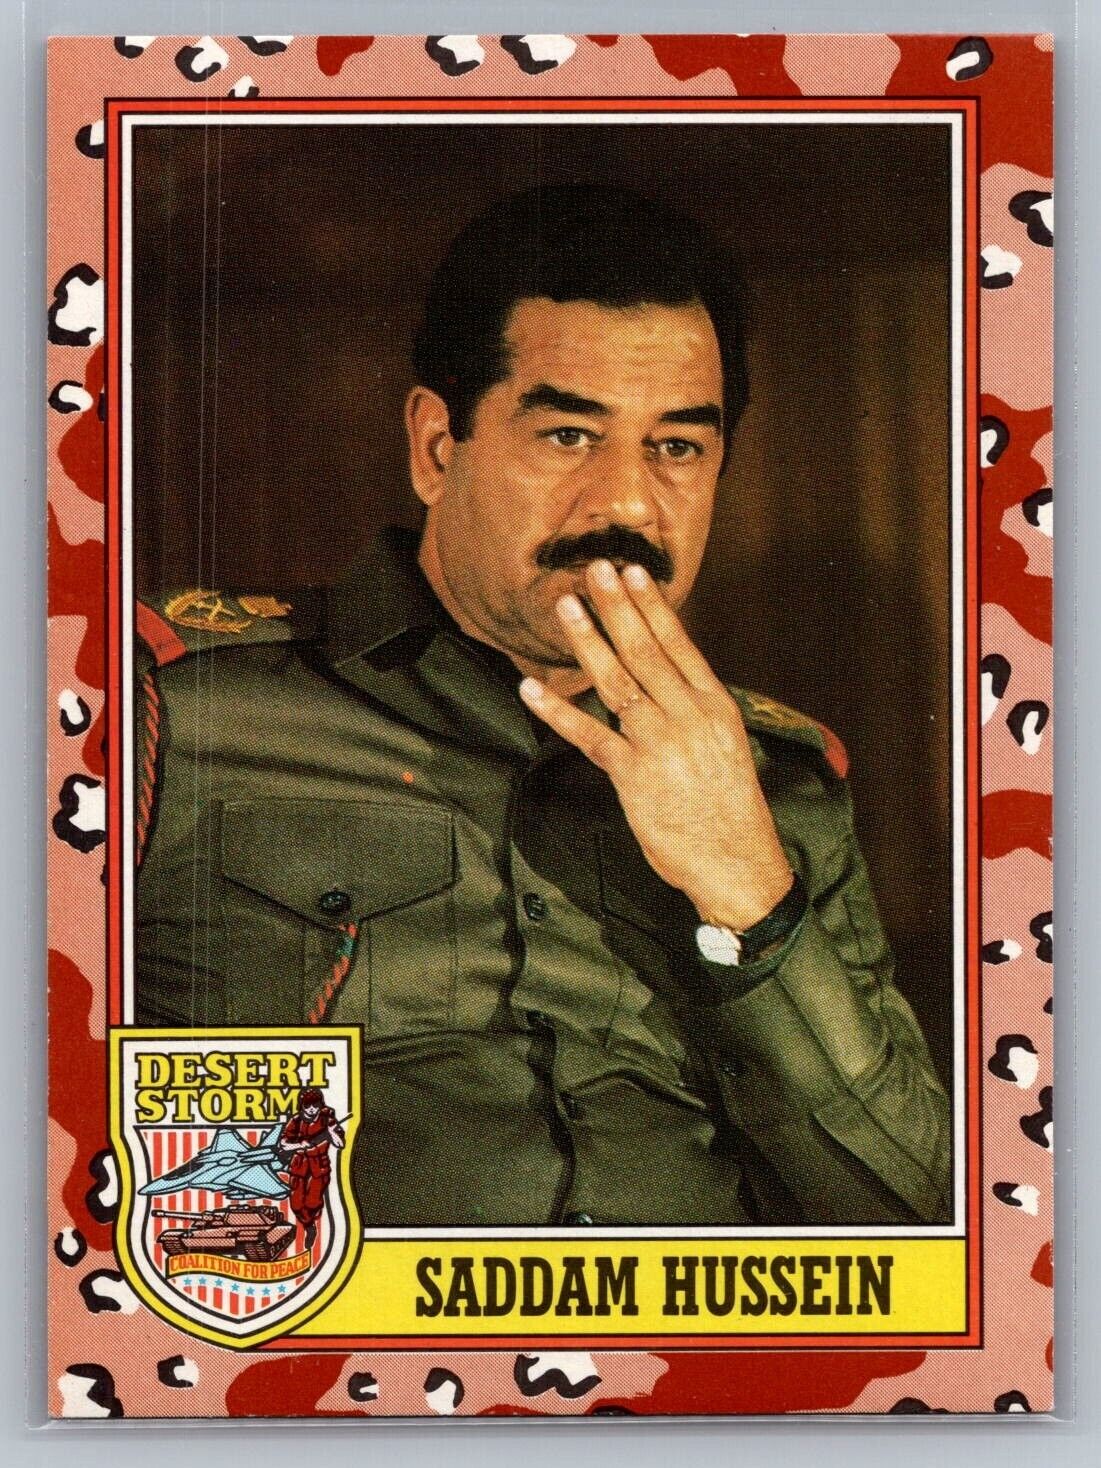 Saddam Hussein 1991 Topps #189 Desert Storm (RC) - NM-MT *TEXCARDS*